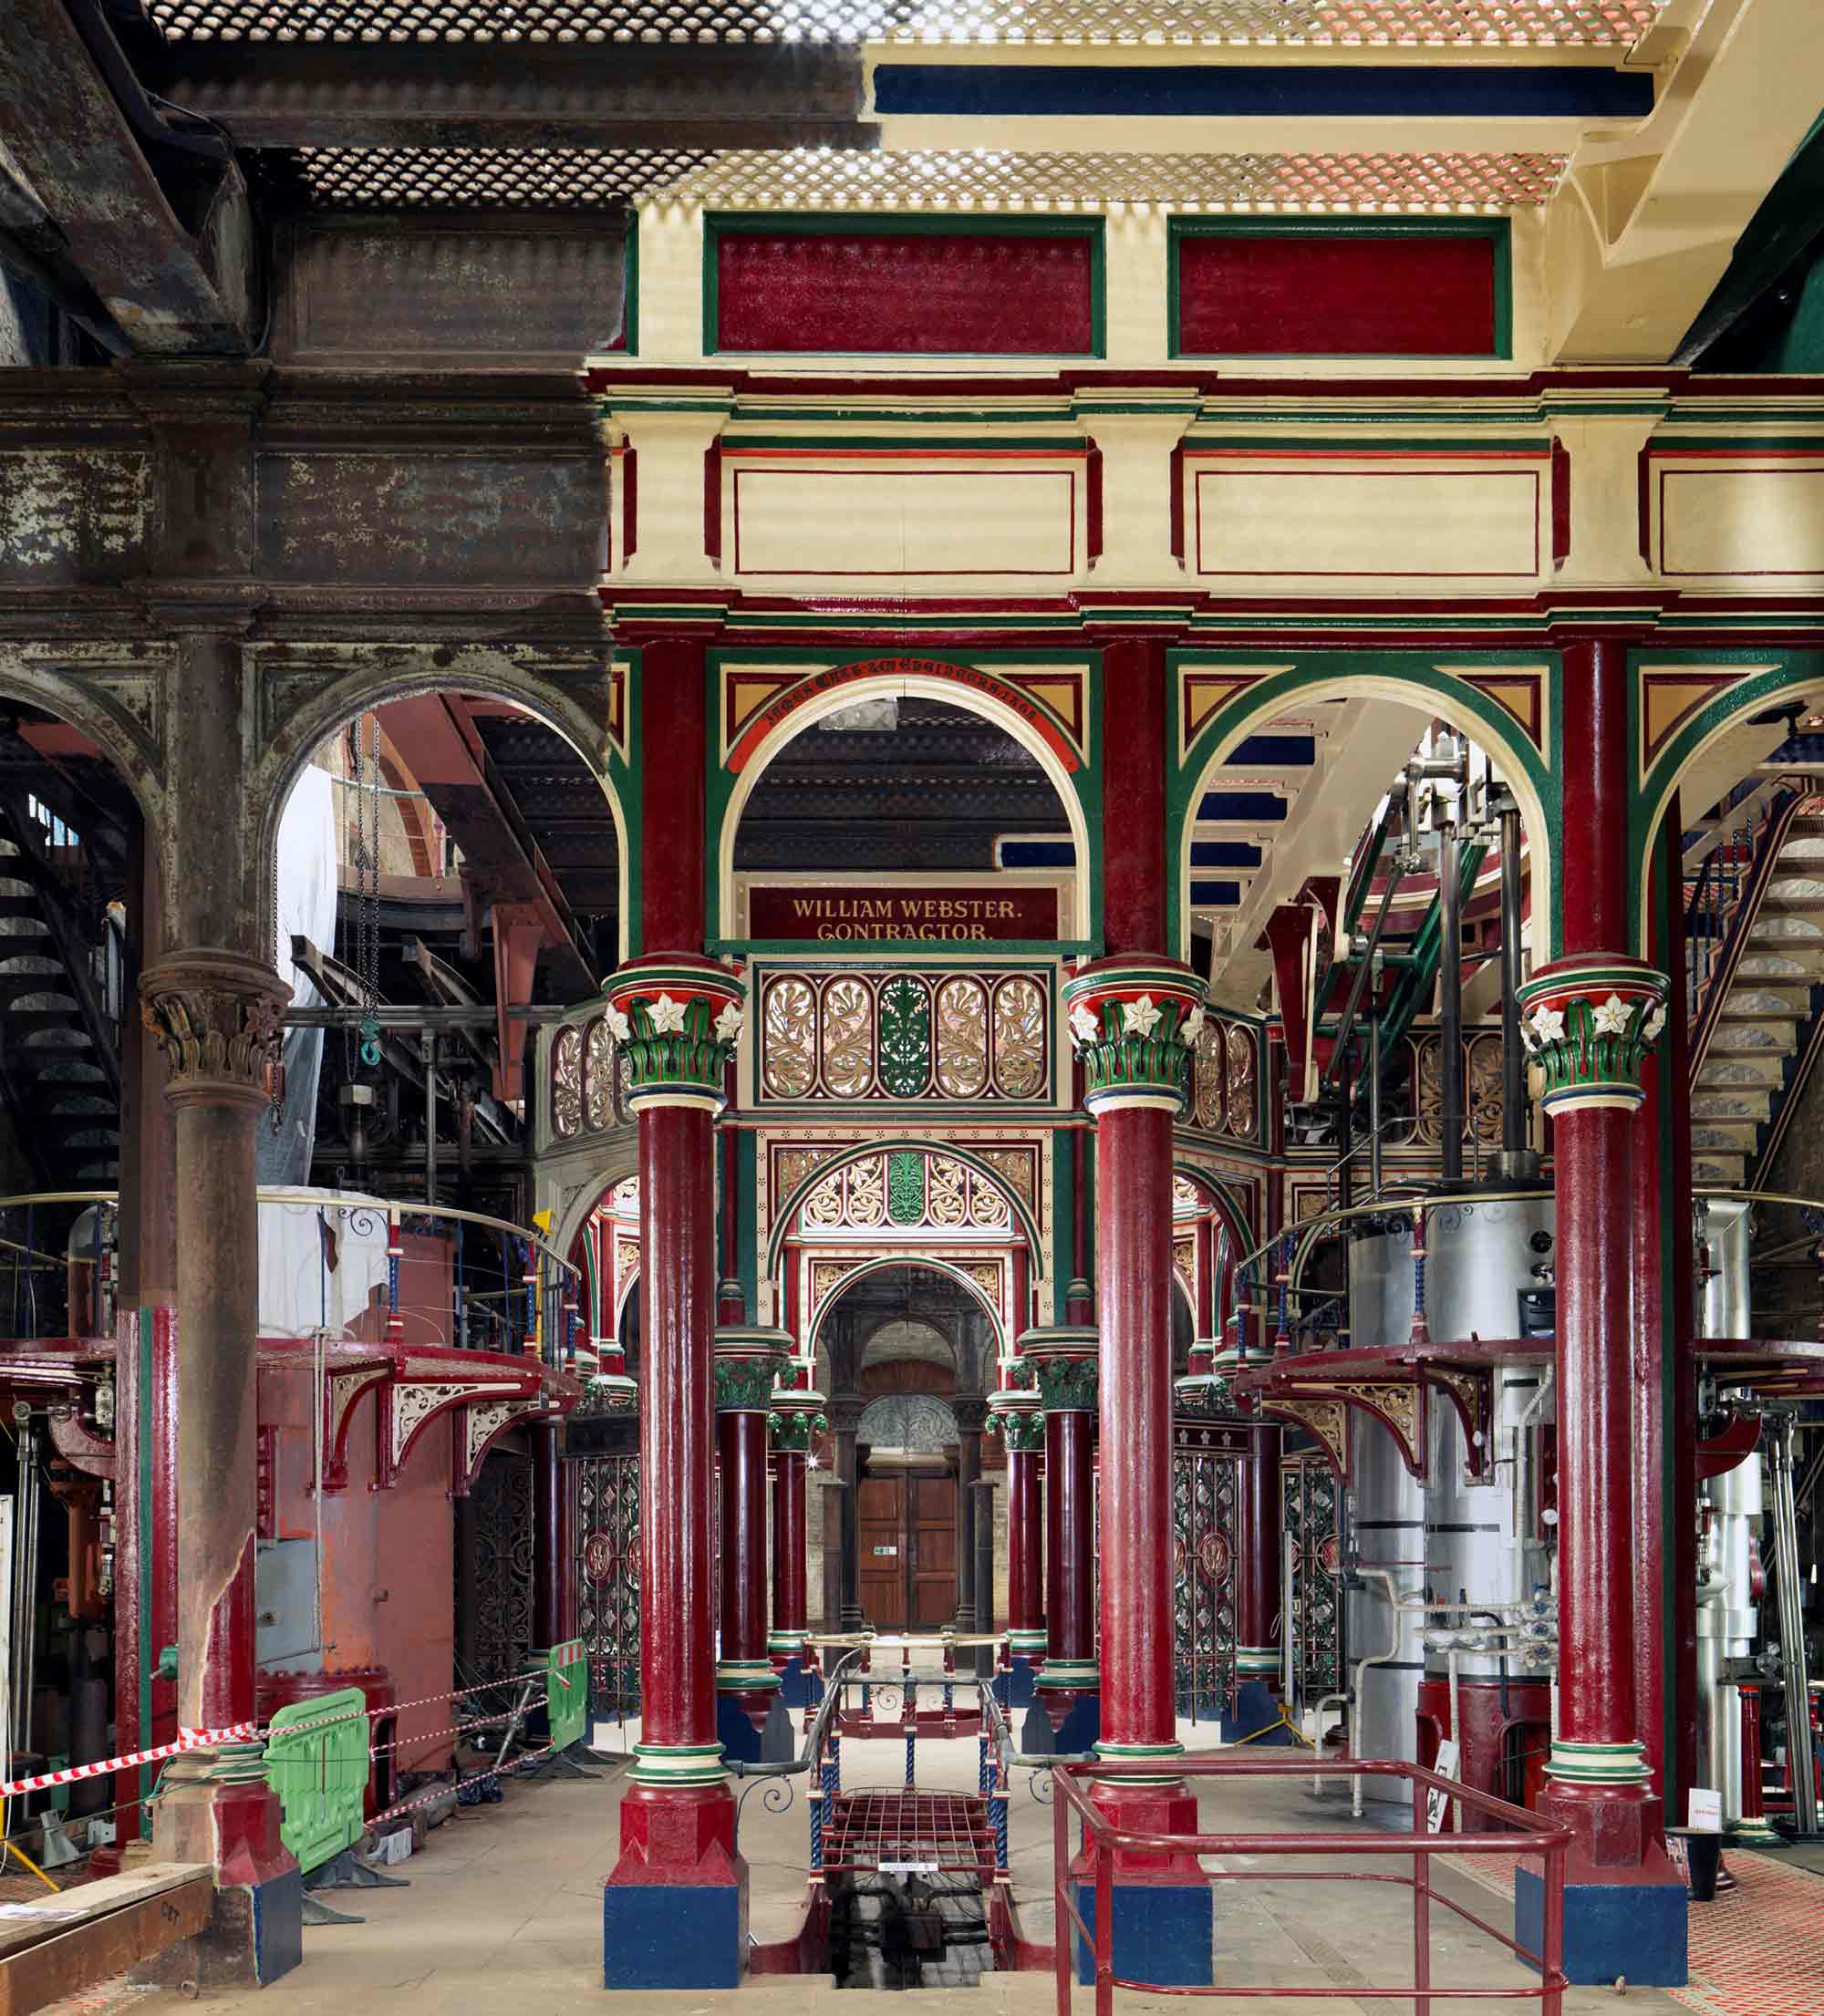 Interior view of the pumping station, looking towards the main atrium space, showing restored and unrestored ironwork